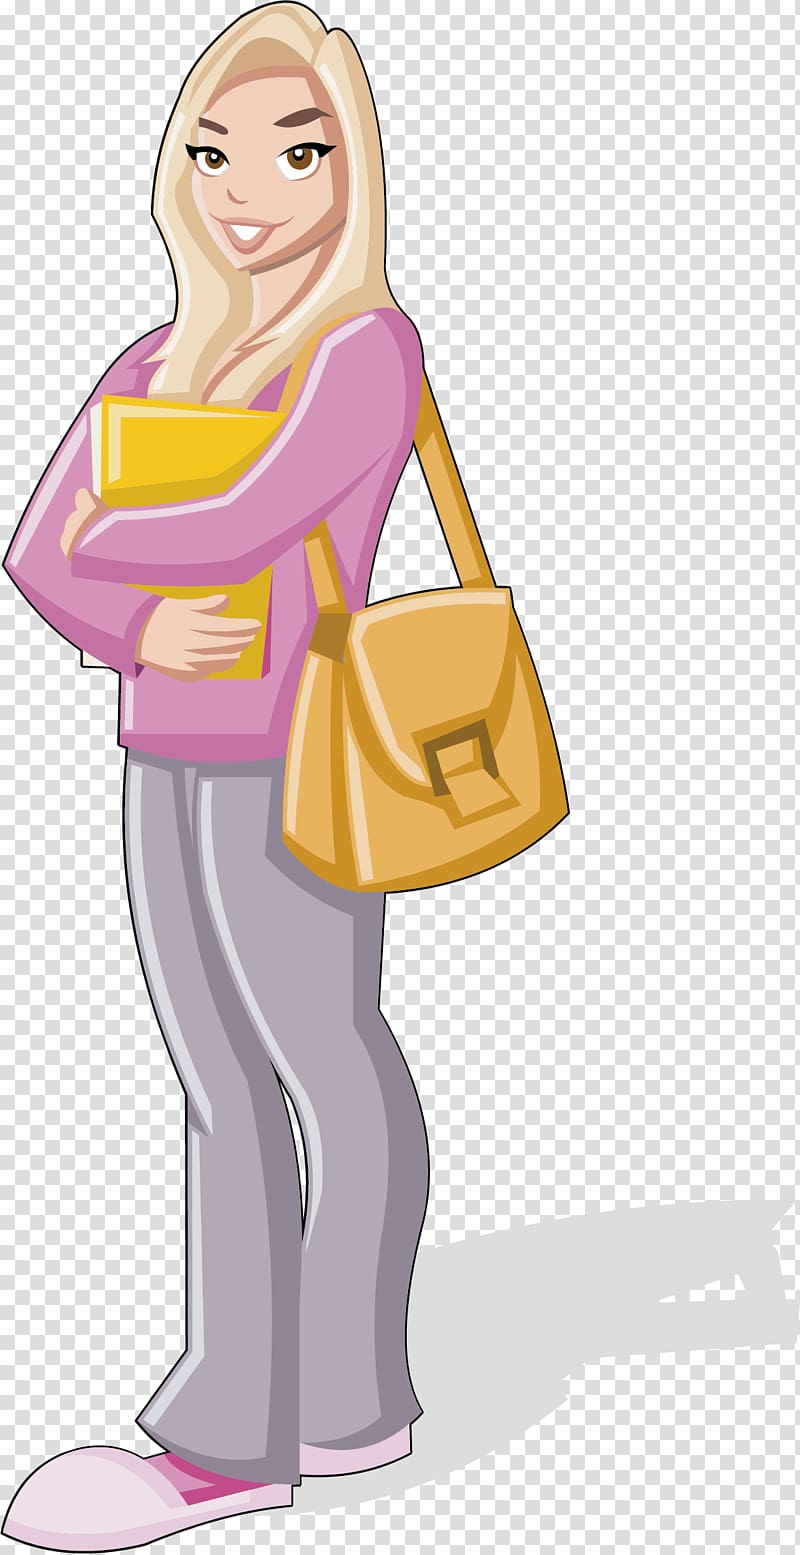 Student Cartoon Woman Illustration, A rich woman who goes to school transparent background PNG clipart